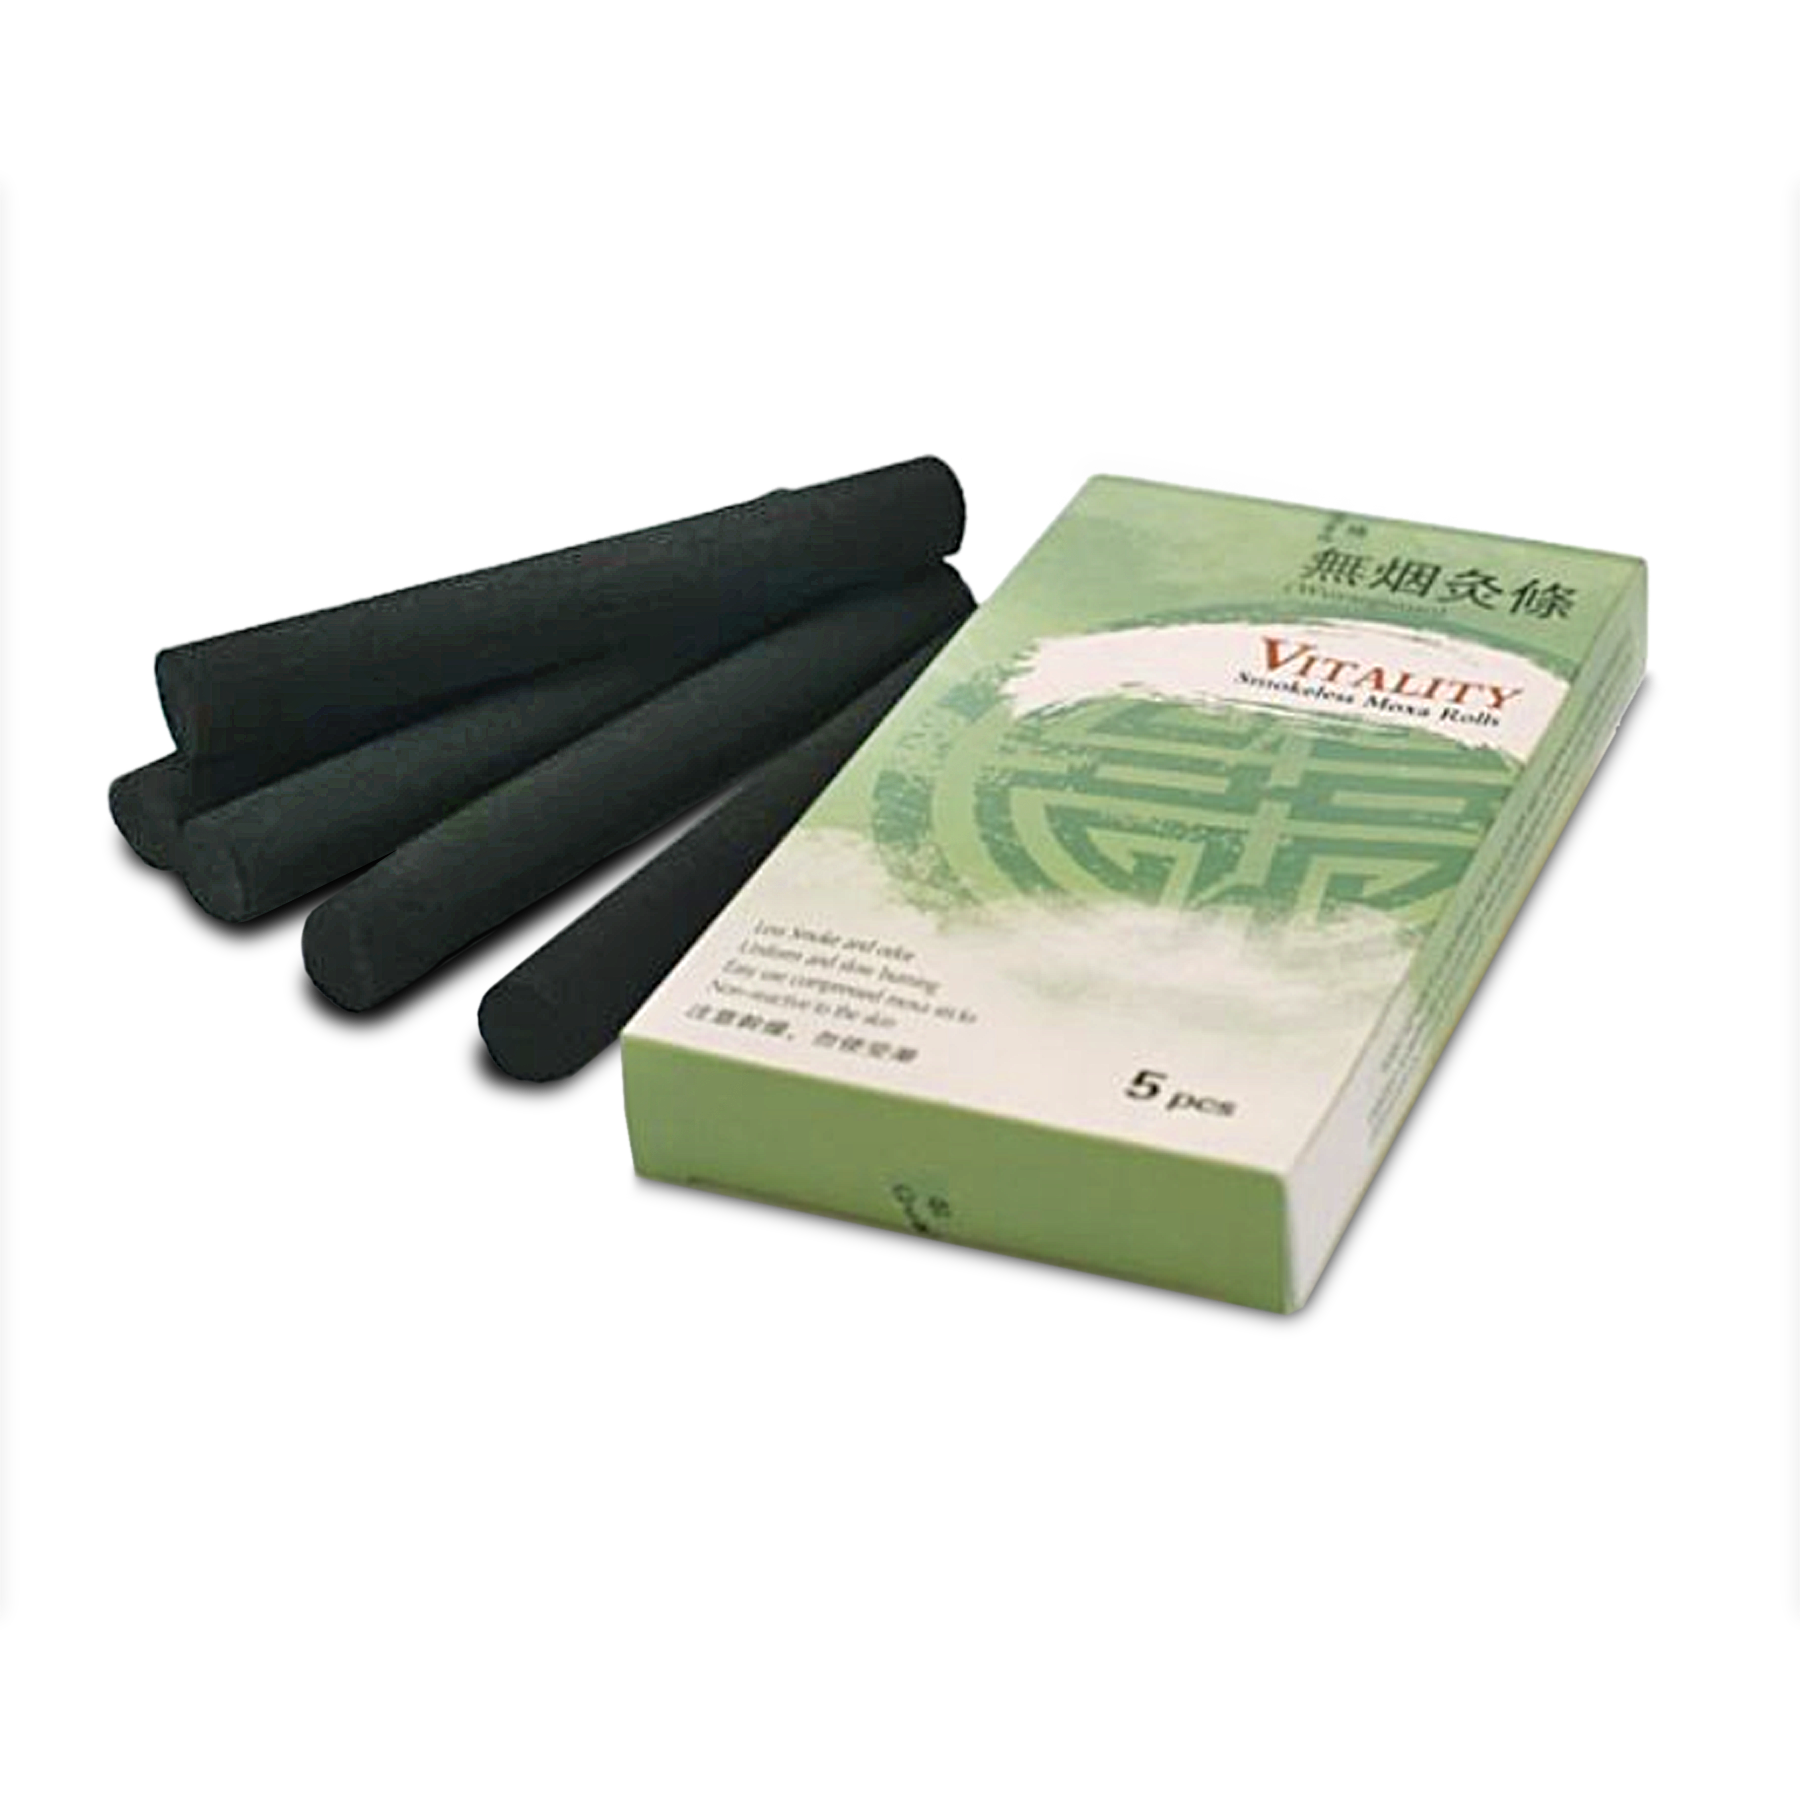 Moxa sticks are what the Chinese call “the People’s Medicine” because it’s affordable and effective for a whole mess of DIY health benefits.